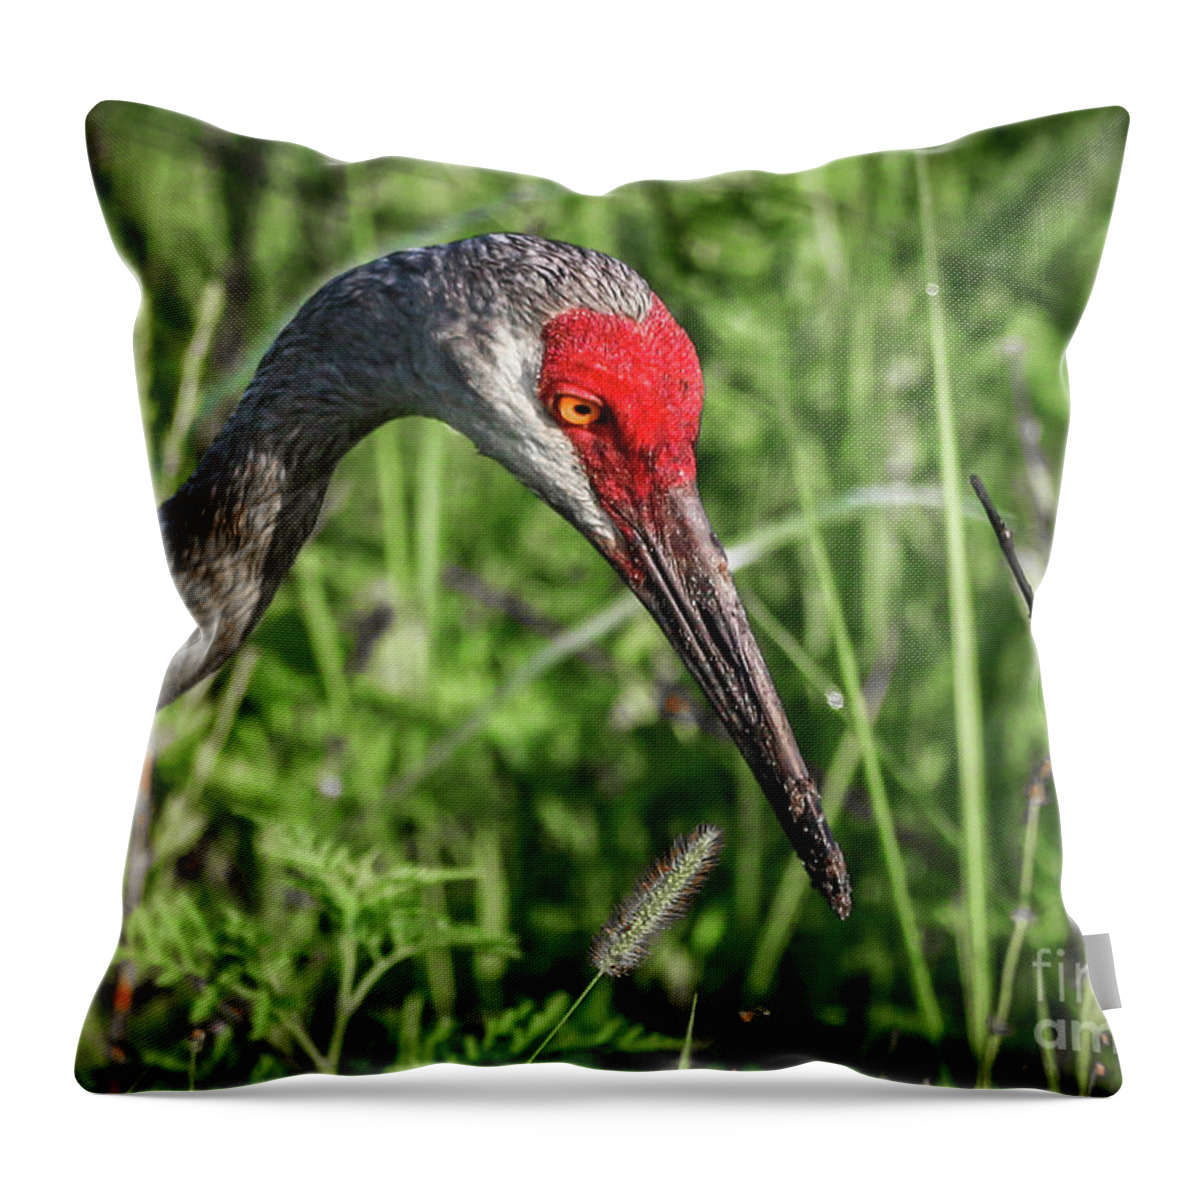 Crane Throw Pillow featuring the photograph Look Down Crane by Tom Claud